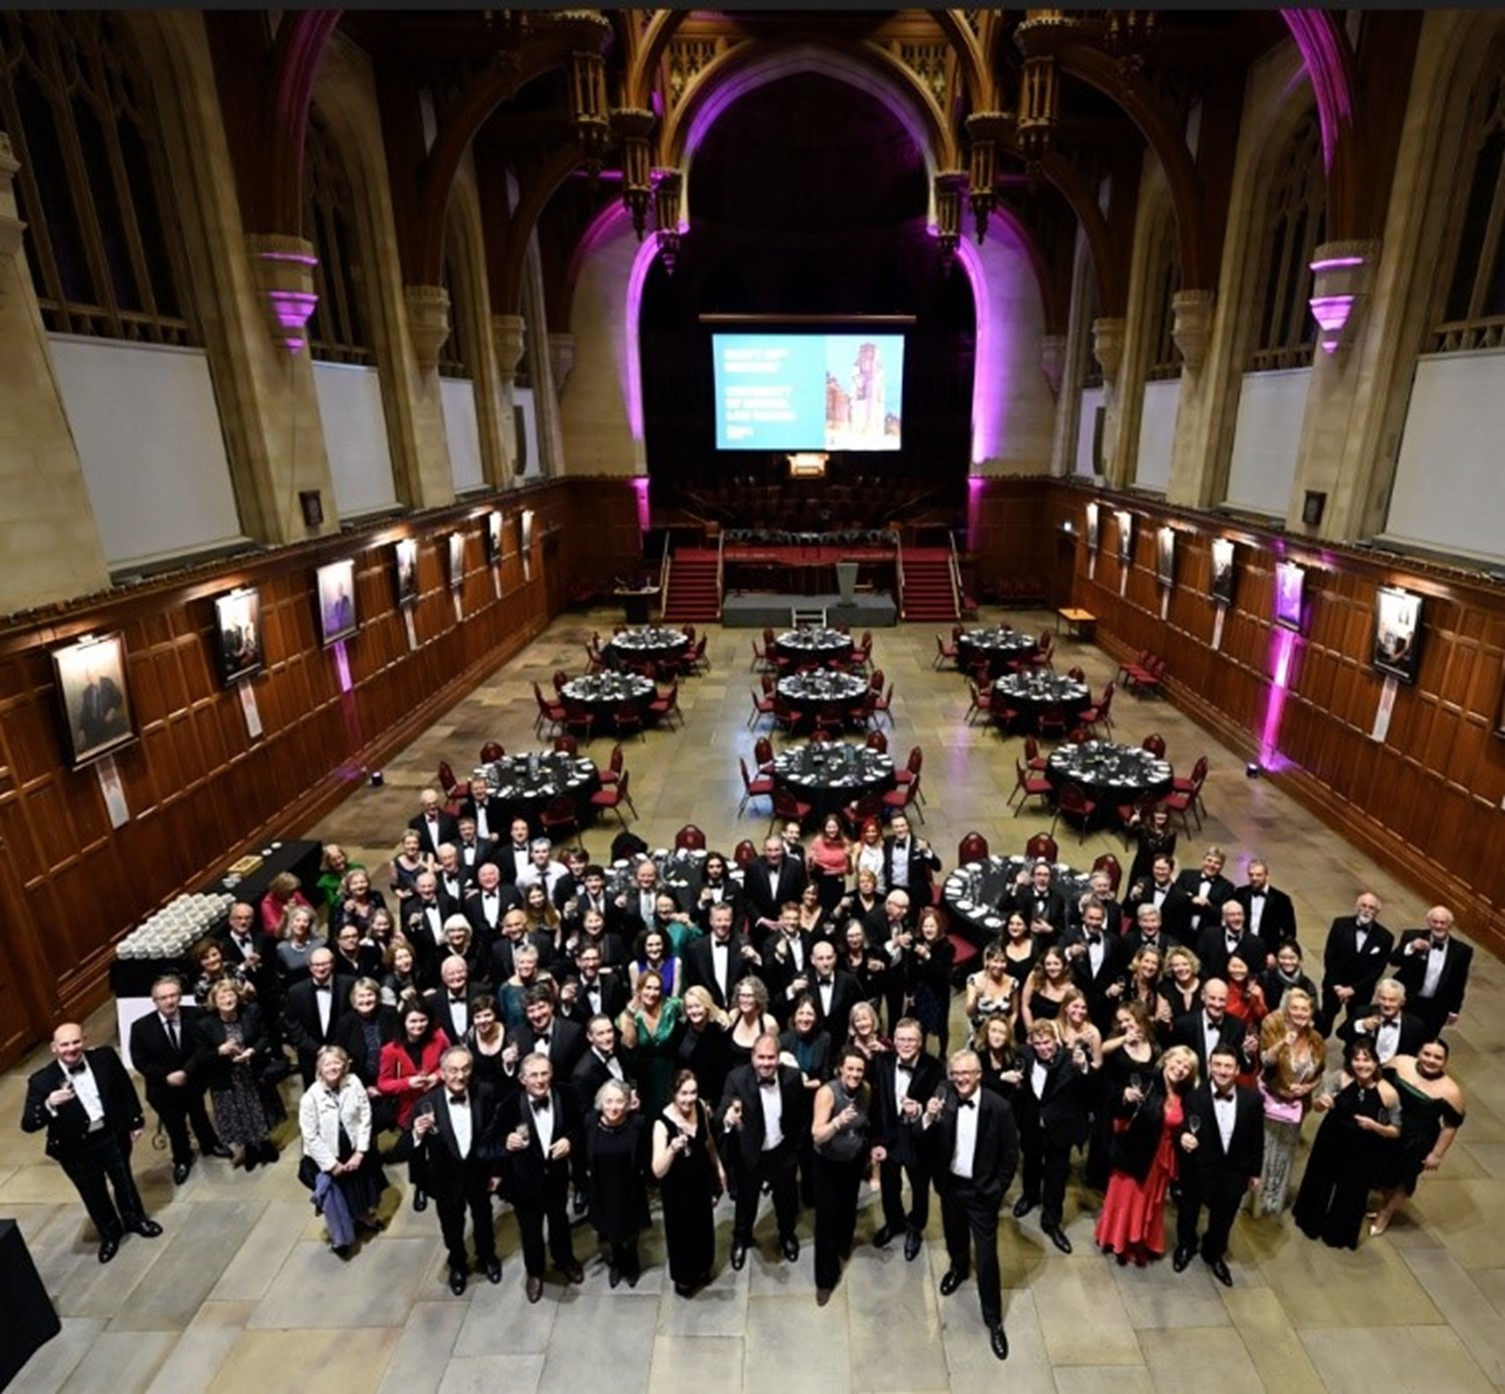 University of Bristol law School academics, alumni and students gathered in the Wills Memorial Building Great Hall at a gala dinner to celebrate the Law School's 90th birthday.